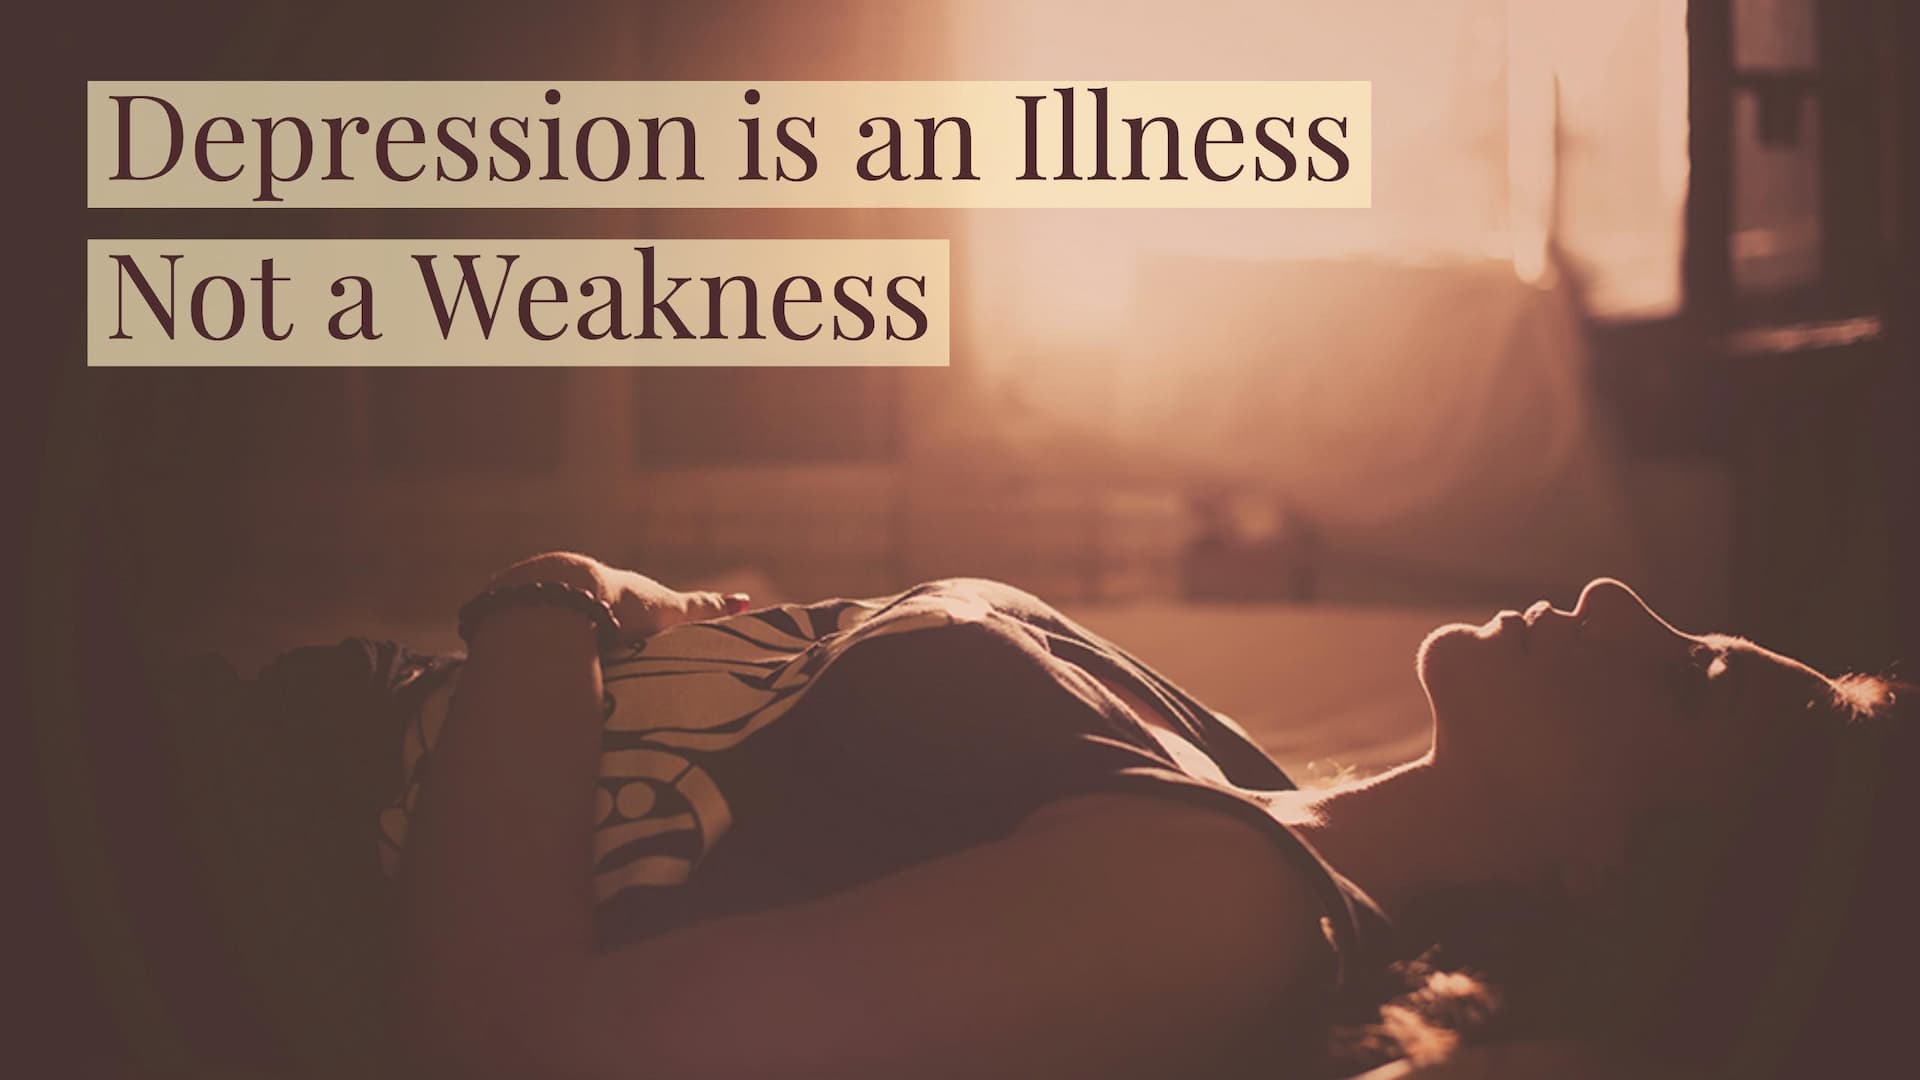 Depression is an illness, not a weakness